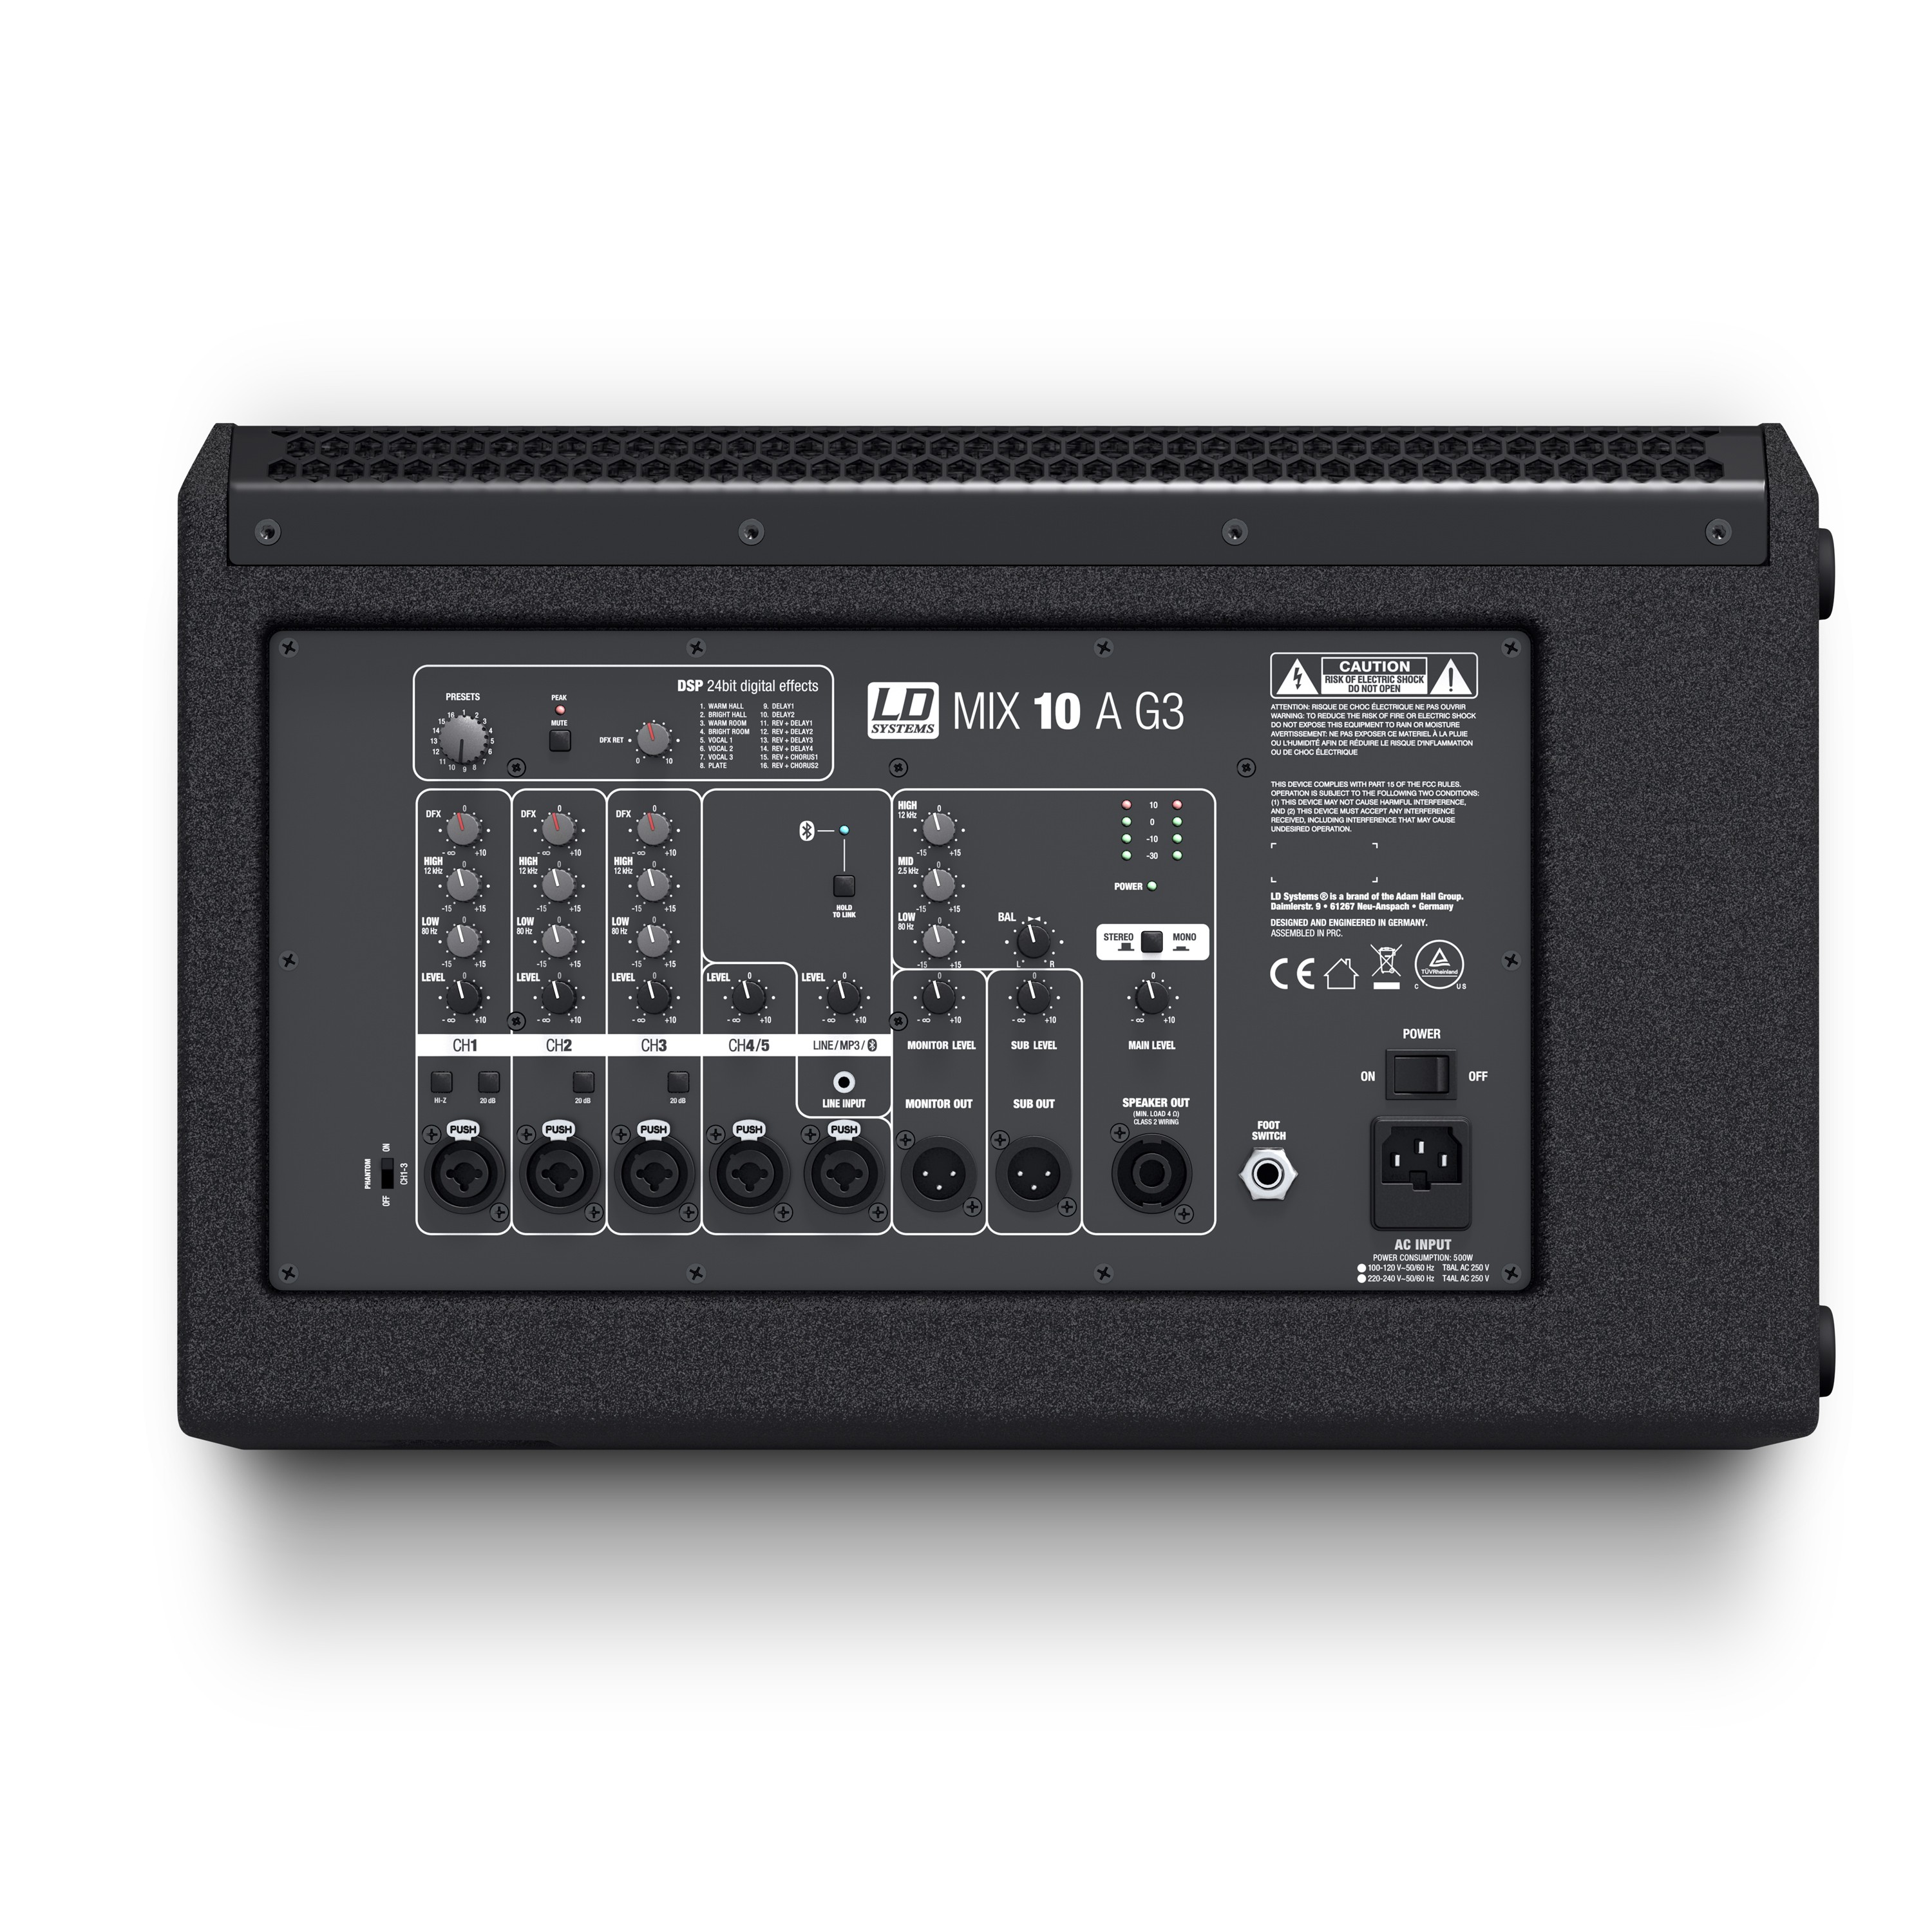 Ld Systems Mix 10 A G3 - Sono Portable - Variation 2